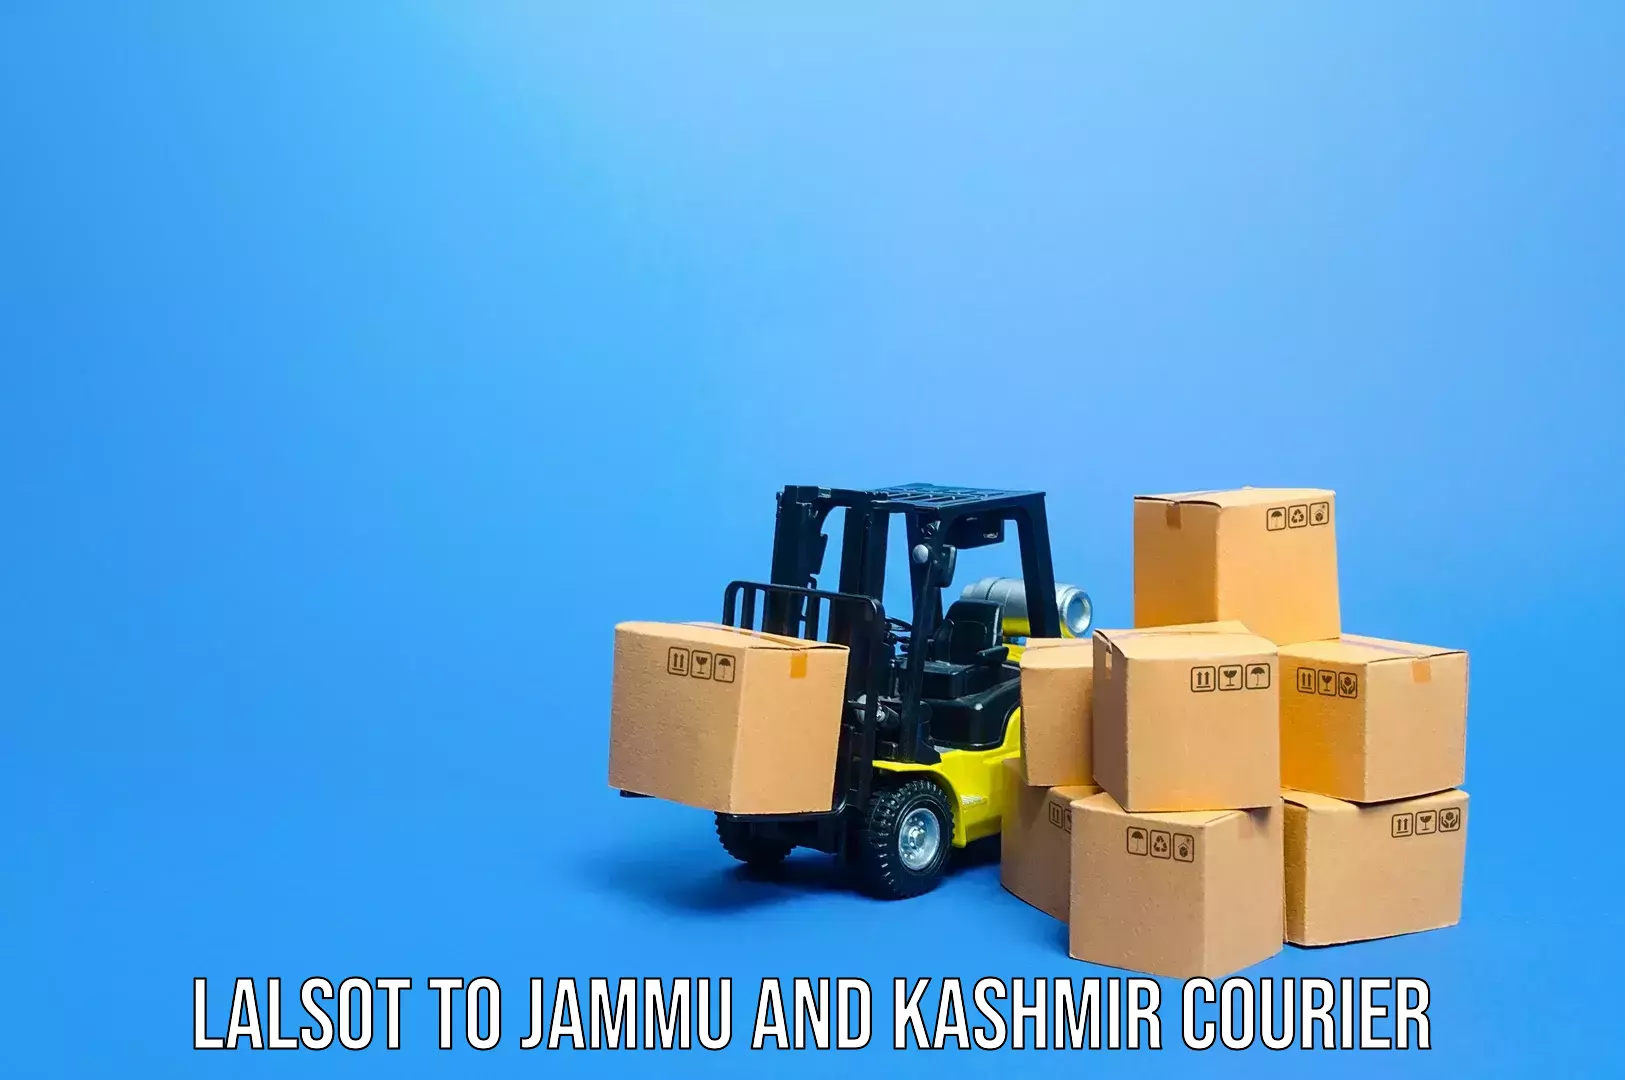 Baggage courier strategy Lalsot to Srinagar Kashmir